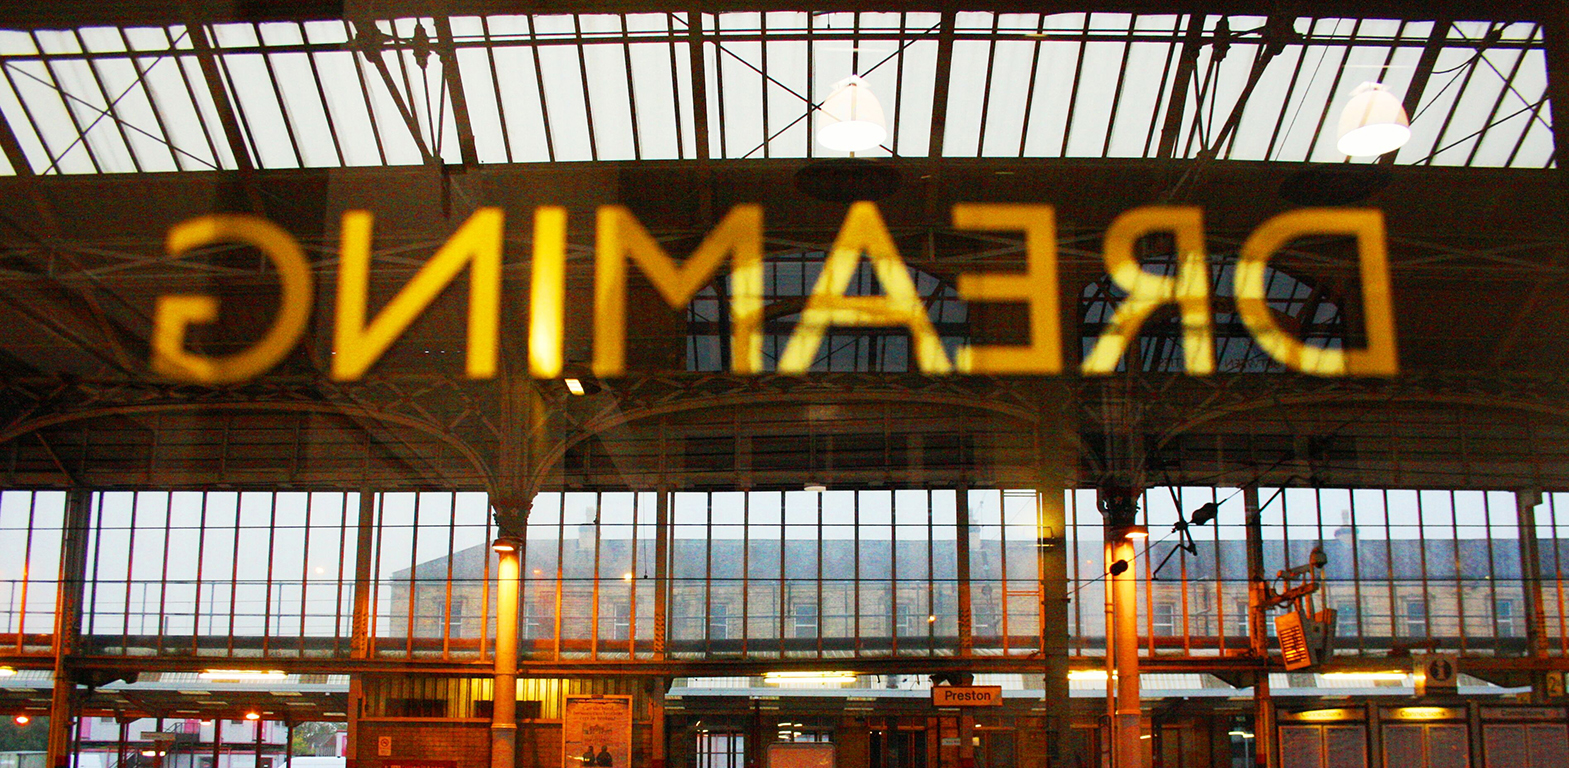 Letters on the windows of the waiting rooms of Preston train station as part of an artwork by Lisa Wigham. The word is 'dreaming' and is photographed from behind